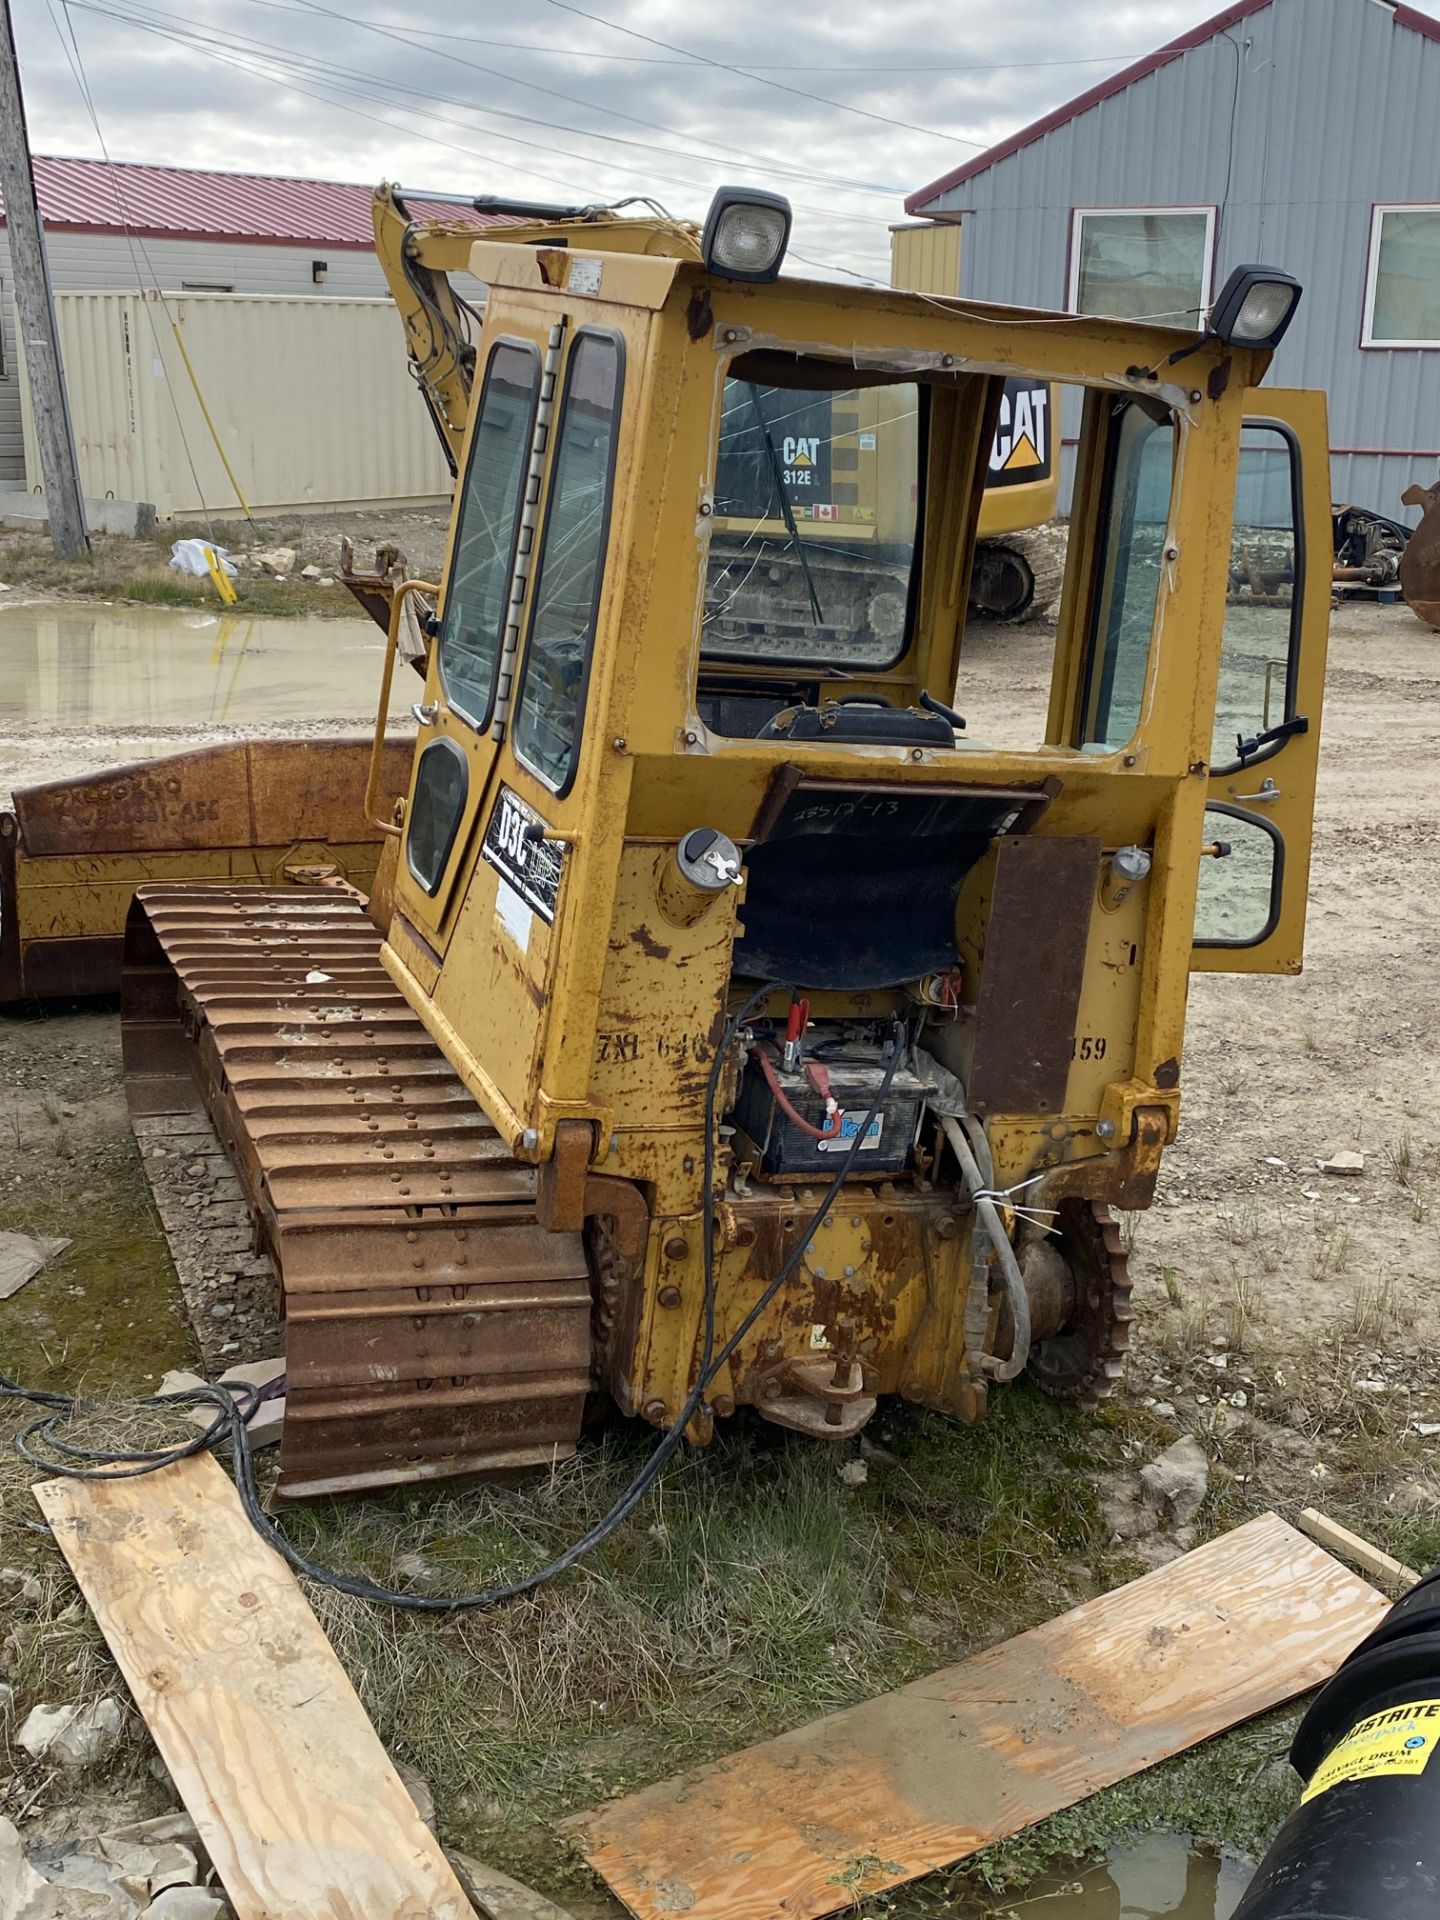 CATERPILLAR DC3 CRAWLER DOZER TRACK REPAIR REQUIRED, 6 WAY BLADE, 7029 HRS. S/N 5XK07145 -M TRACK IN - Image 3 of 3